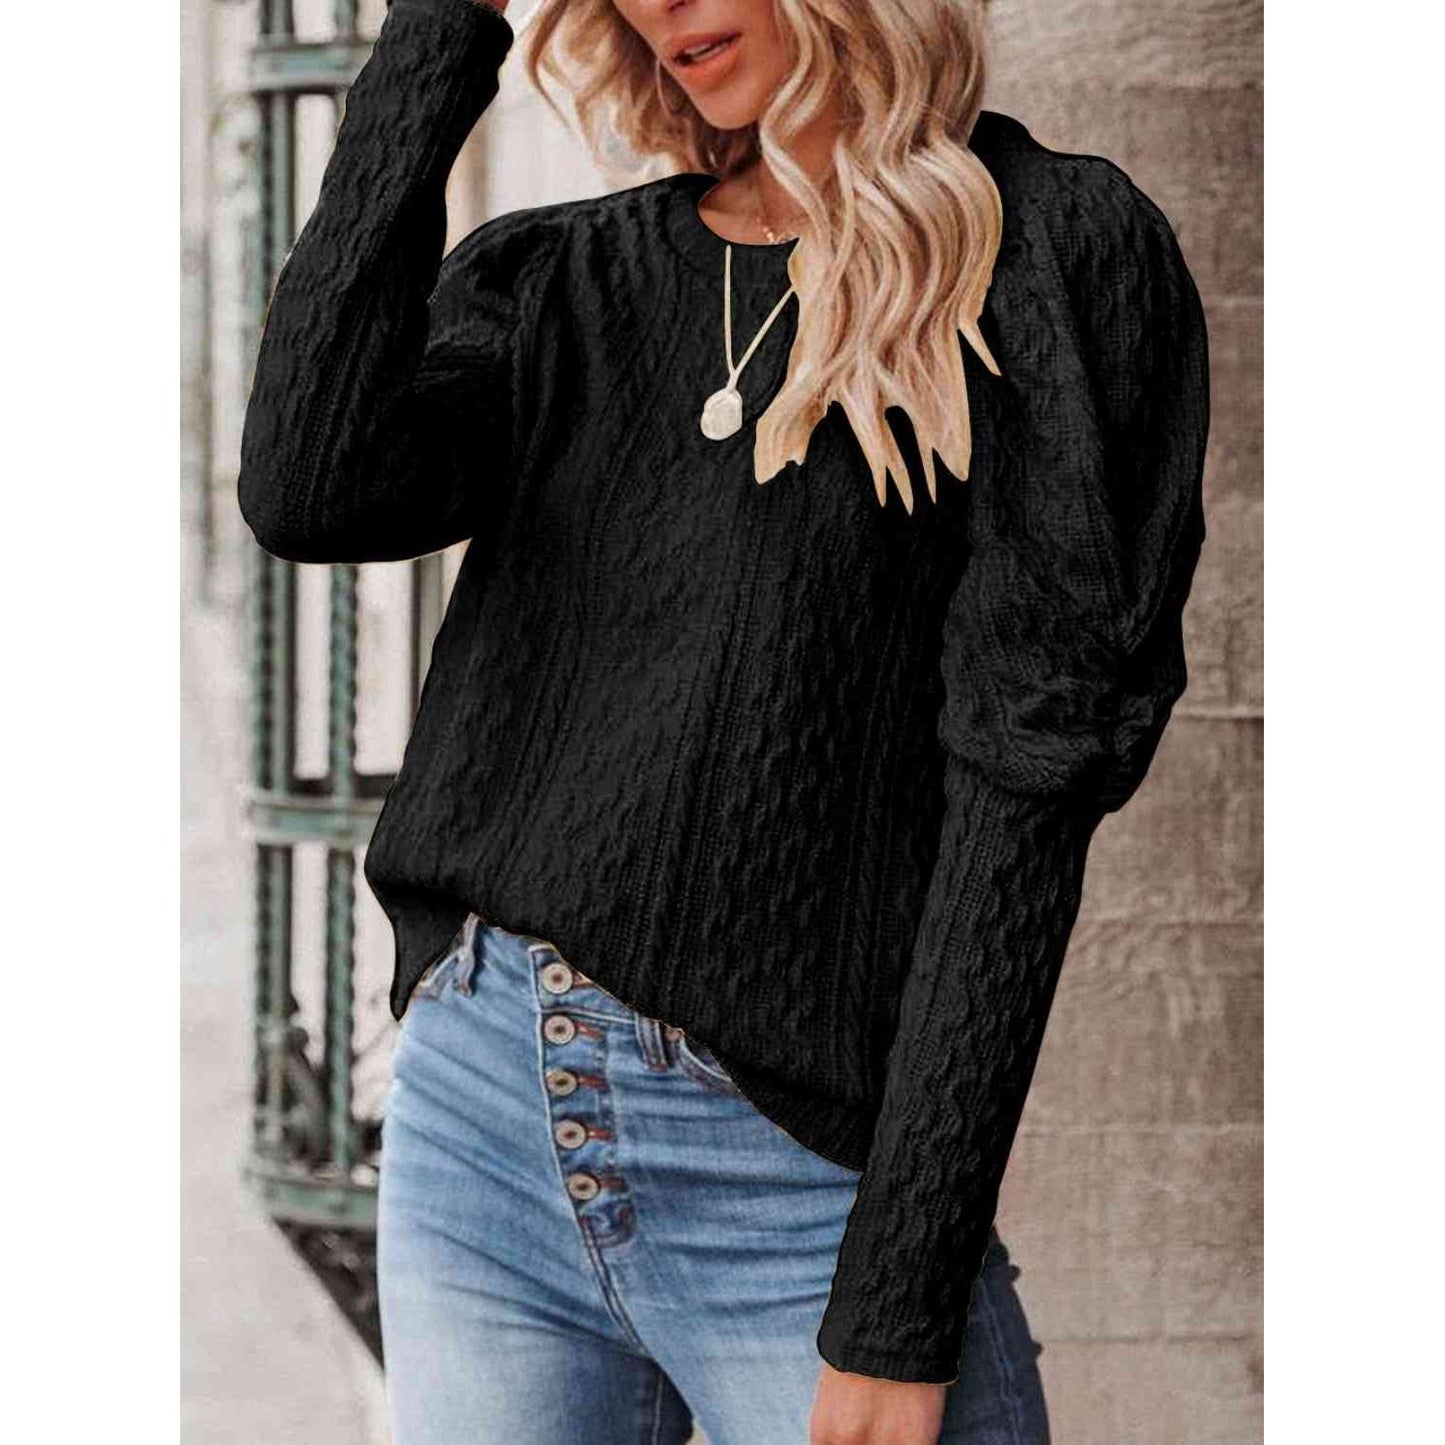 Round Neck Puff Sleeve Knit Top